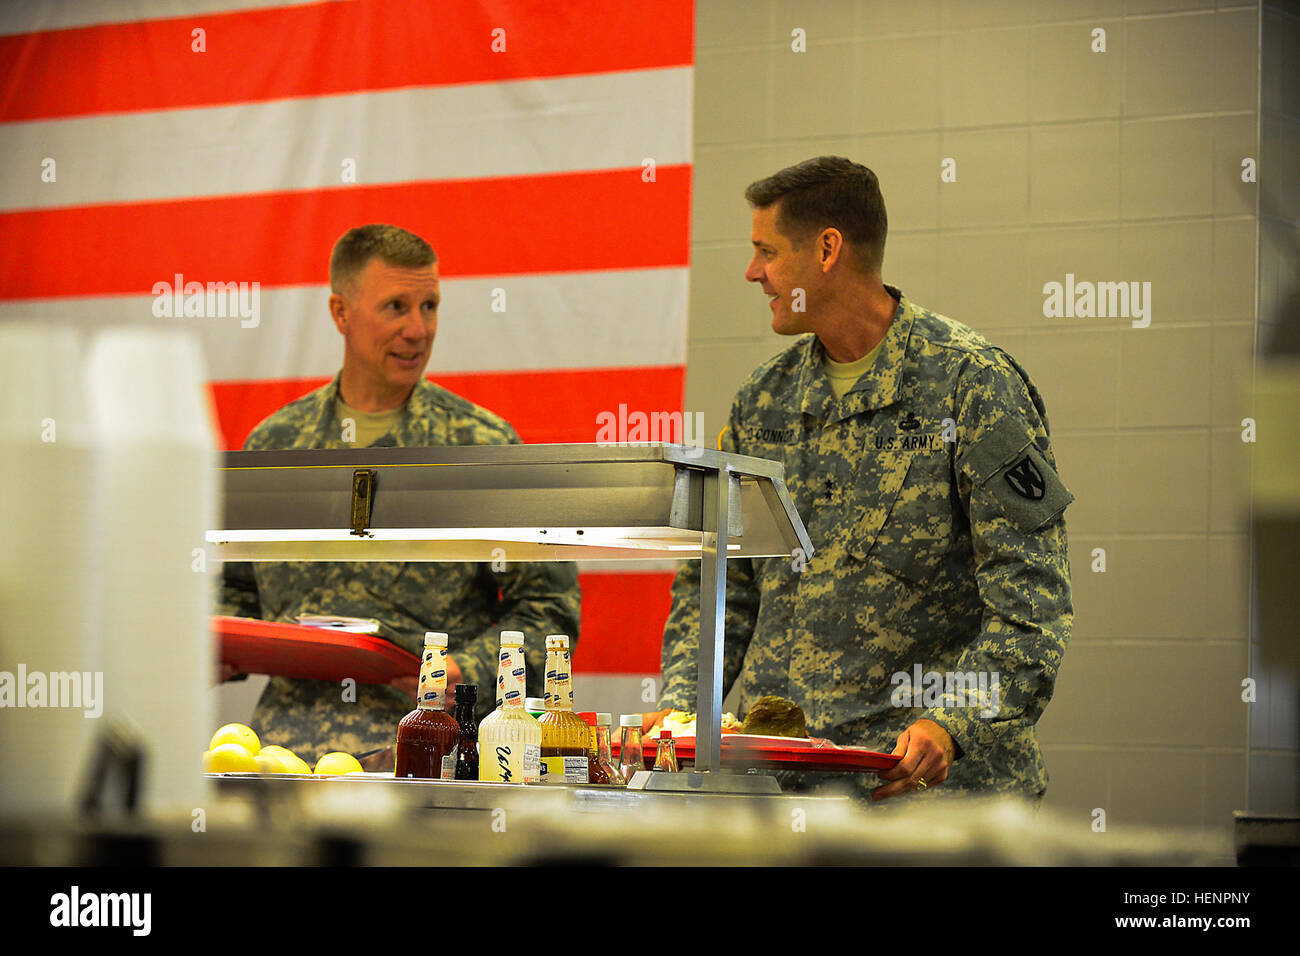 Maj. Gen. John R. O'Connor (right), commanding general of the 21st Theater Sustainment Command, and Col. Dave Brown, outgoing Mihail Kogalniceanu Air Base Regional Support Element officer-in-charge, prepare to eat lunch with military and civilian personnel serving at MK during a visit of the transient air base conducted Aug. 26. The visit provided O’Connor an opportunity to welcome the new RSE OIC, Col. Kevin Mulvihill, and gain insight while providing direction on current and future operations of the base. In February 2014, MK Air Base assumed the bulk of the passenger transit mission for Sol Stock Photo